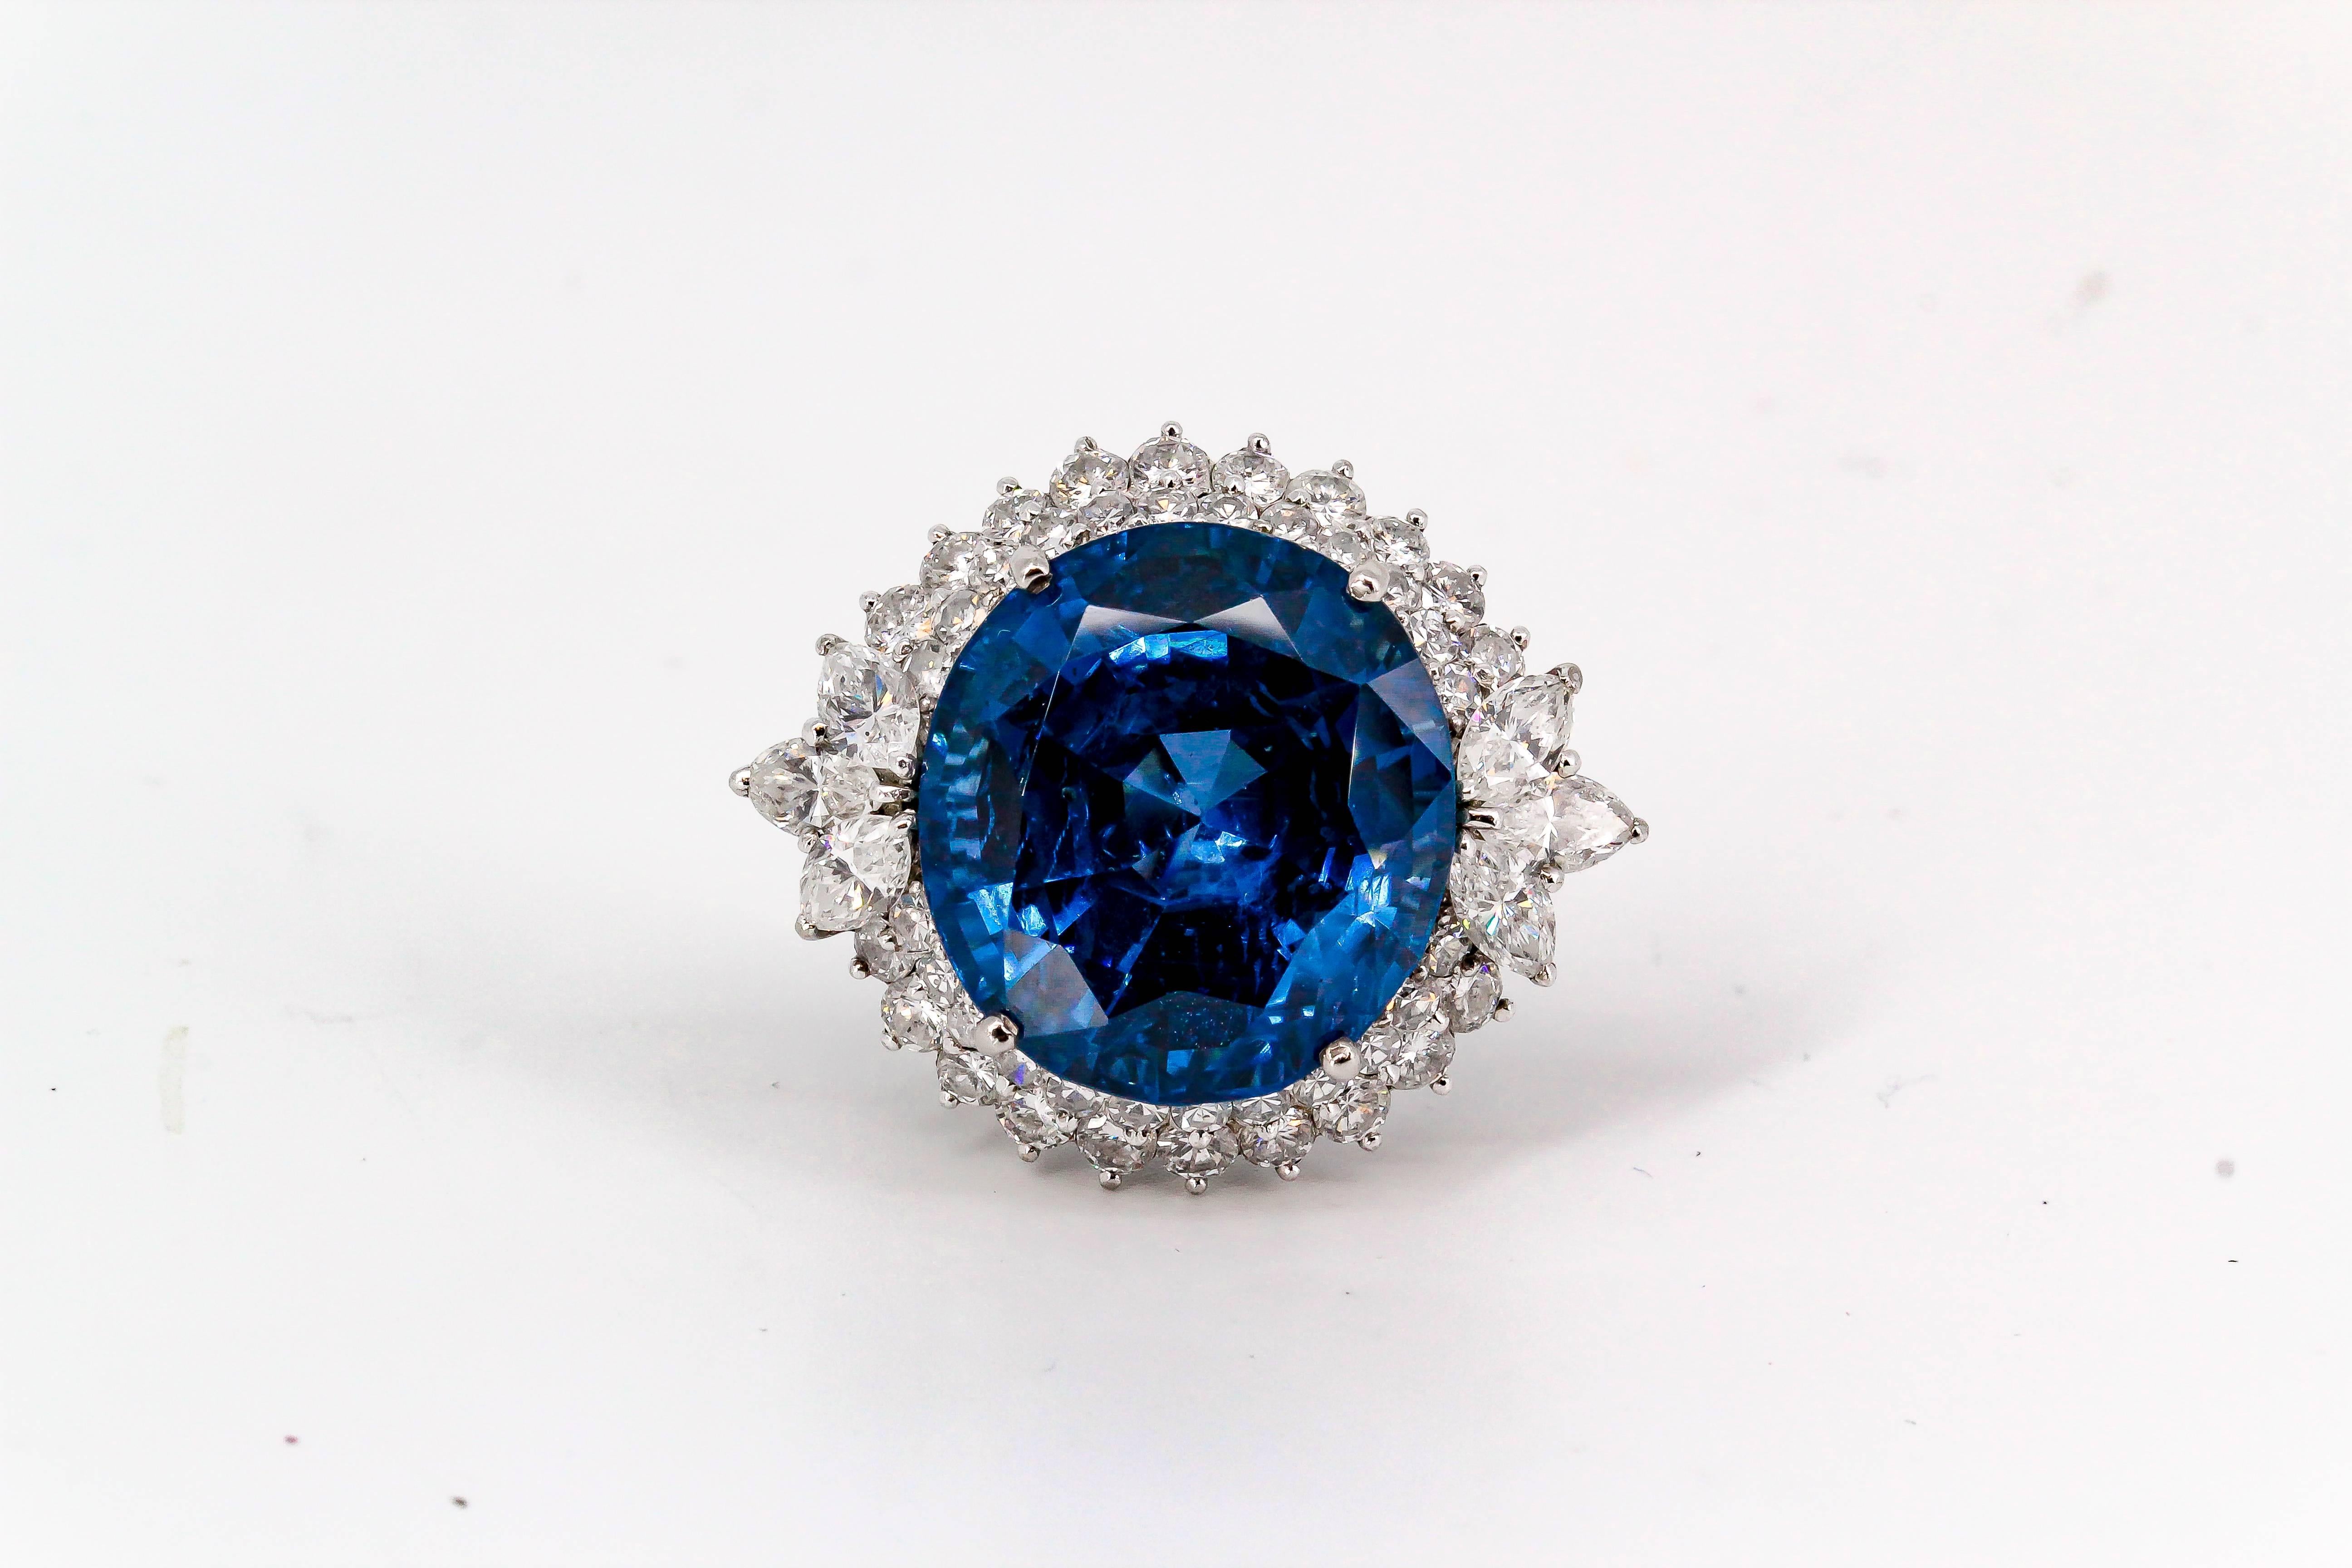 Impressive royal blue Burma sapphire, diamond and platinum dome ring. It features a rich blue central sapphire, AGL certified measuring 17.62x16.17x11.19mm for a total of approx. 26cts. It is surrounded by high grade round and Marquise cut diamonds